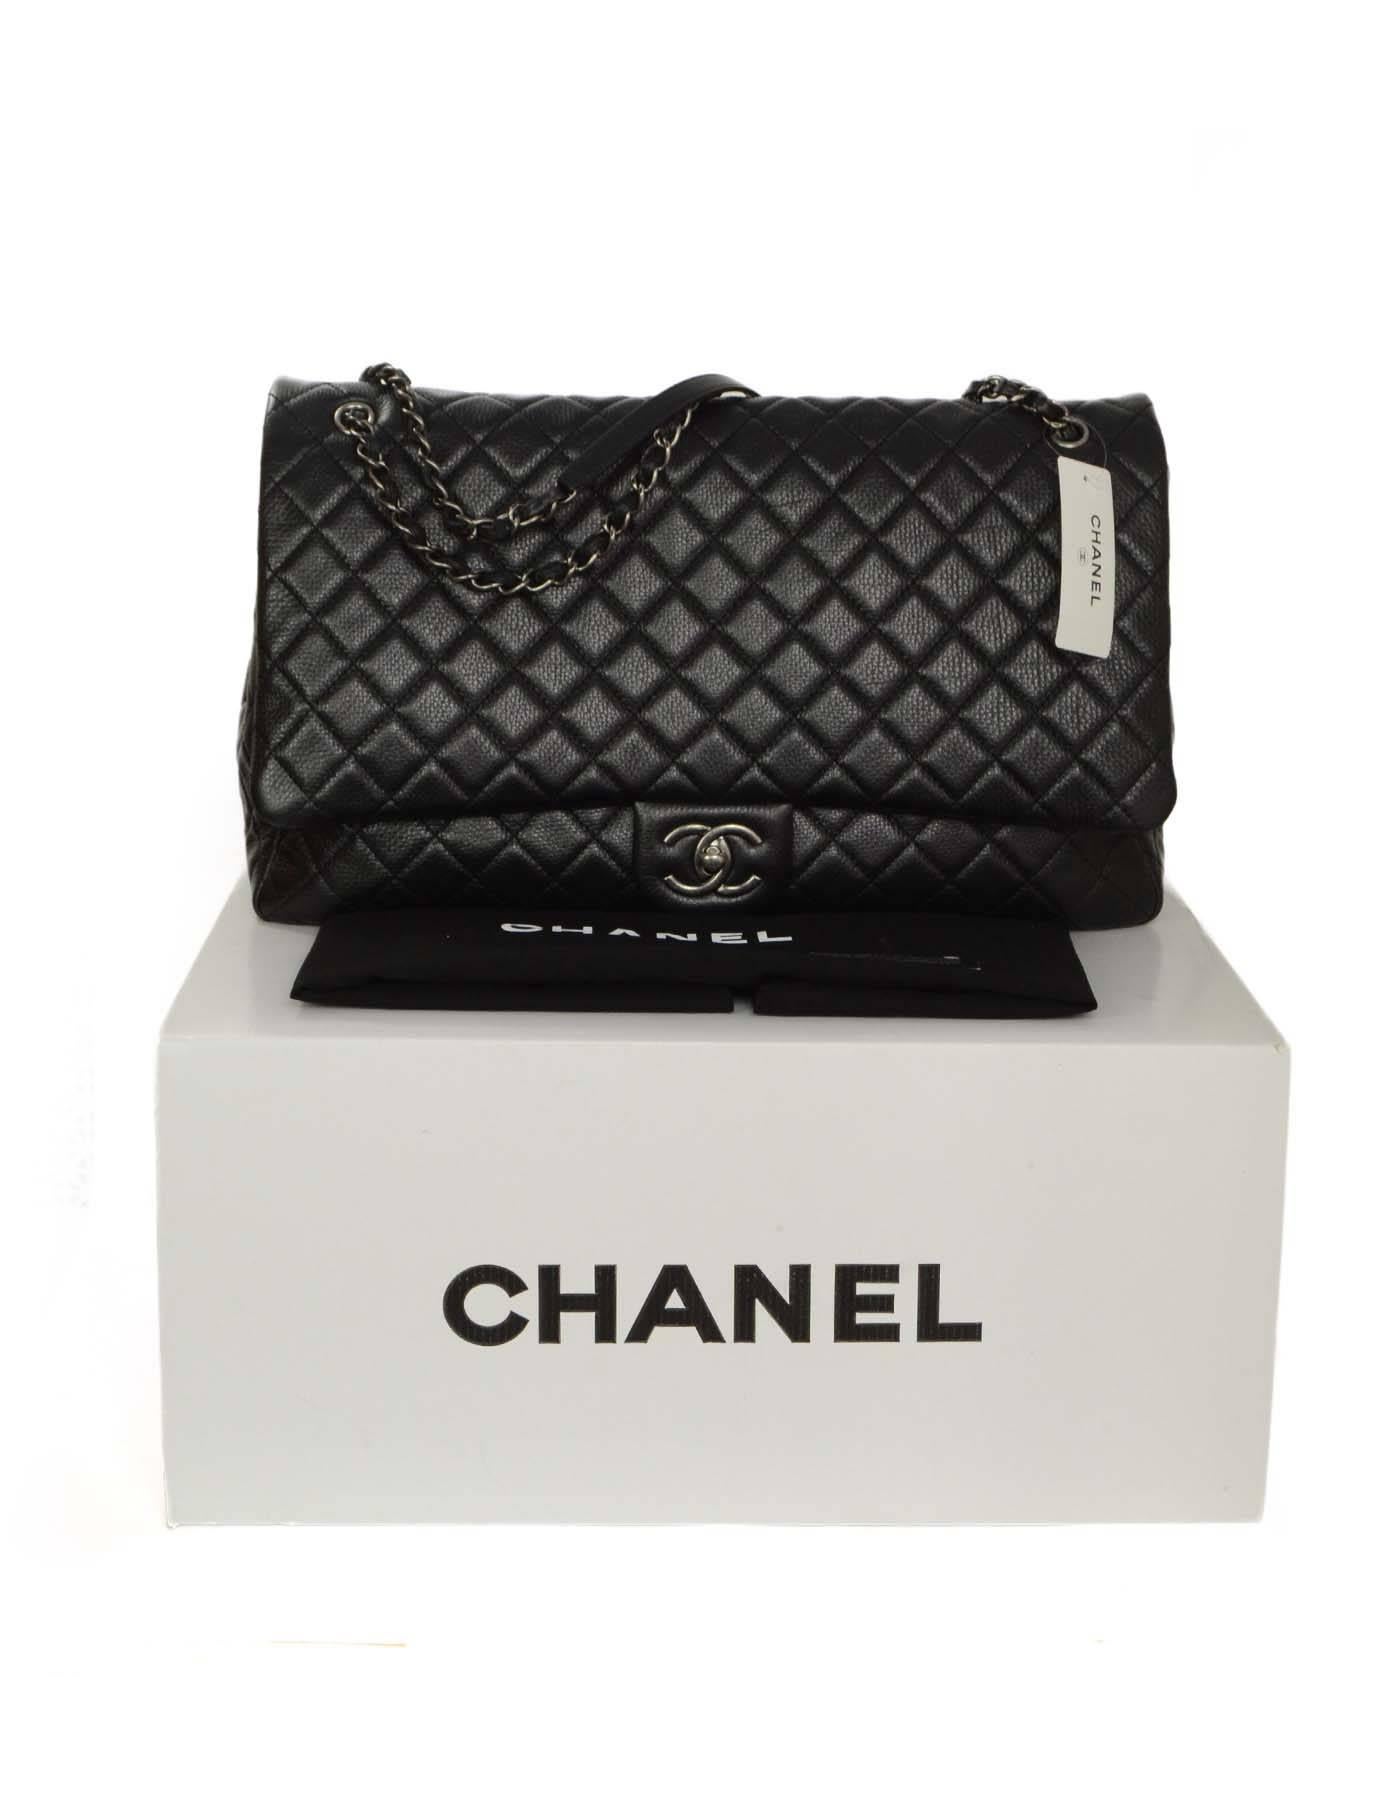 Chanel 2016 NEW w/ TAG Black Leather Quilted XL Flap Bag 3